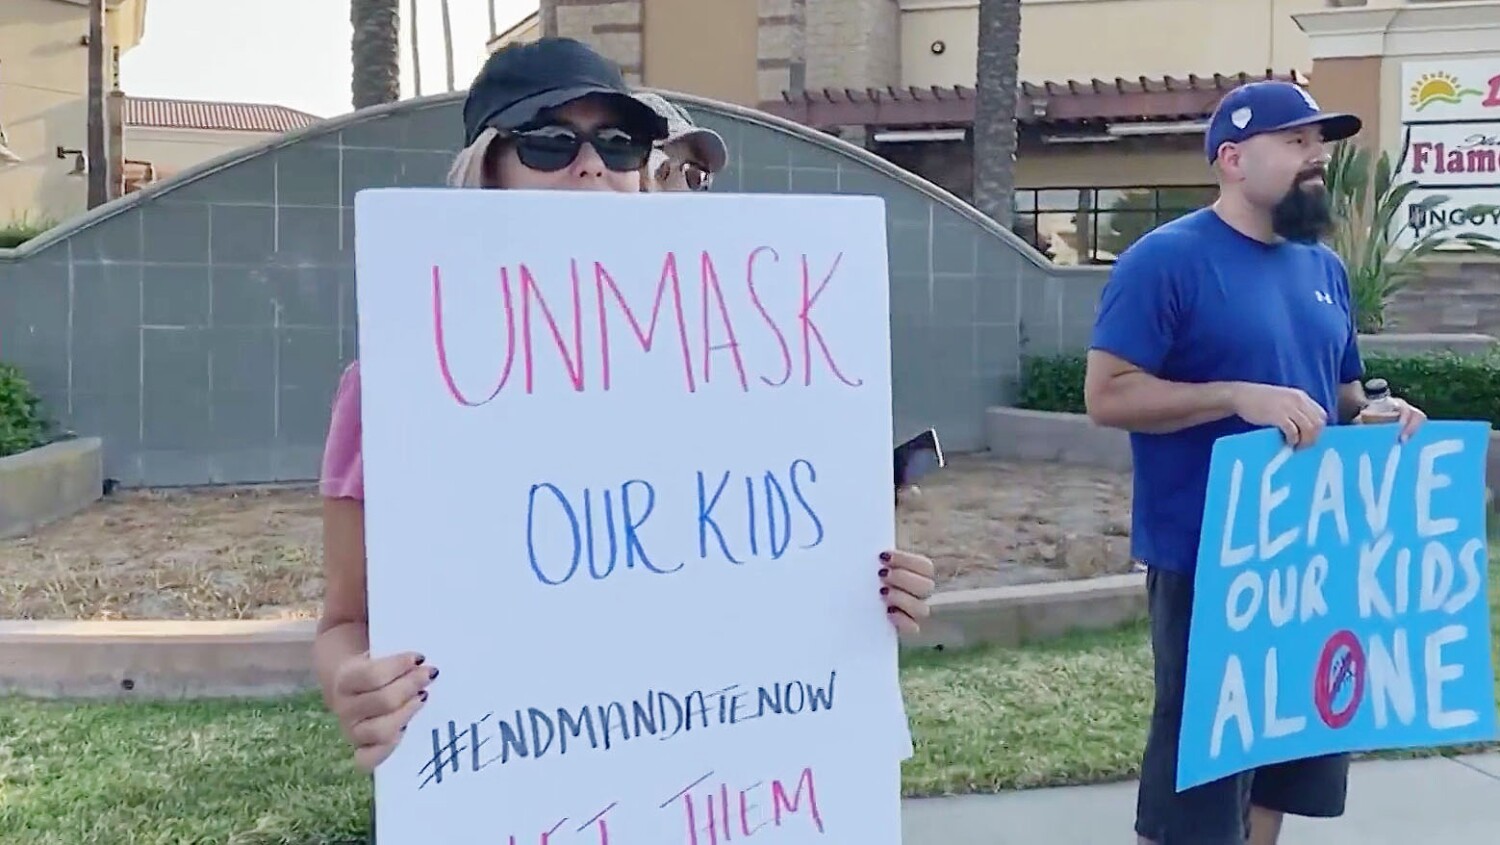 As some parents protest school mask mandates, experts urge students to keep face coverings on